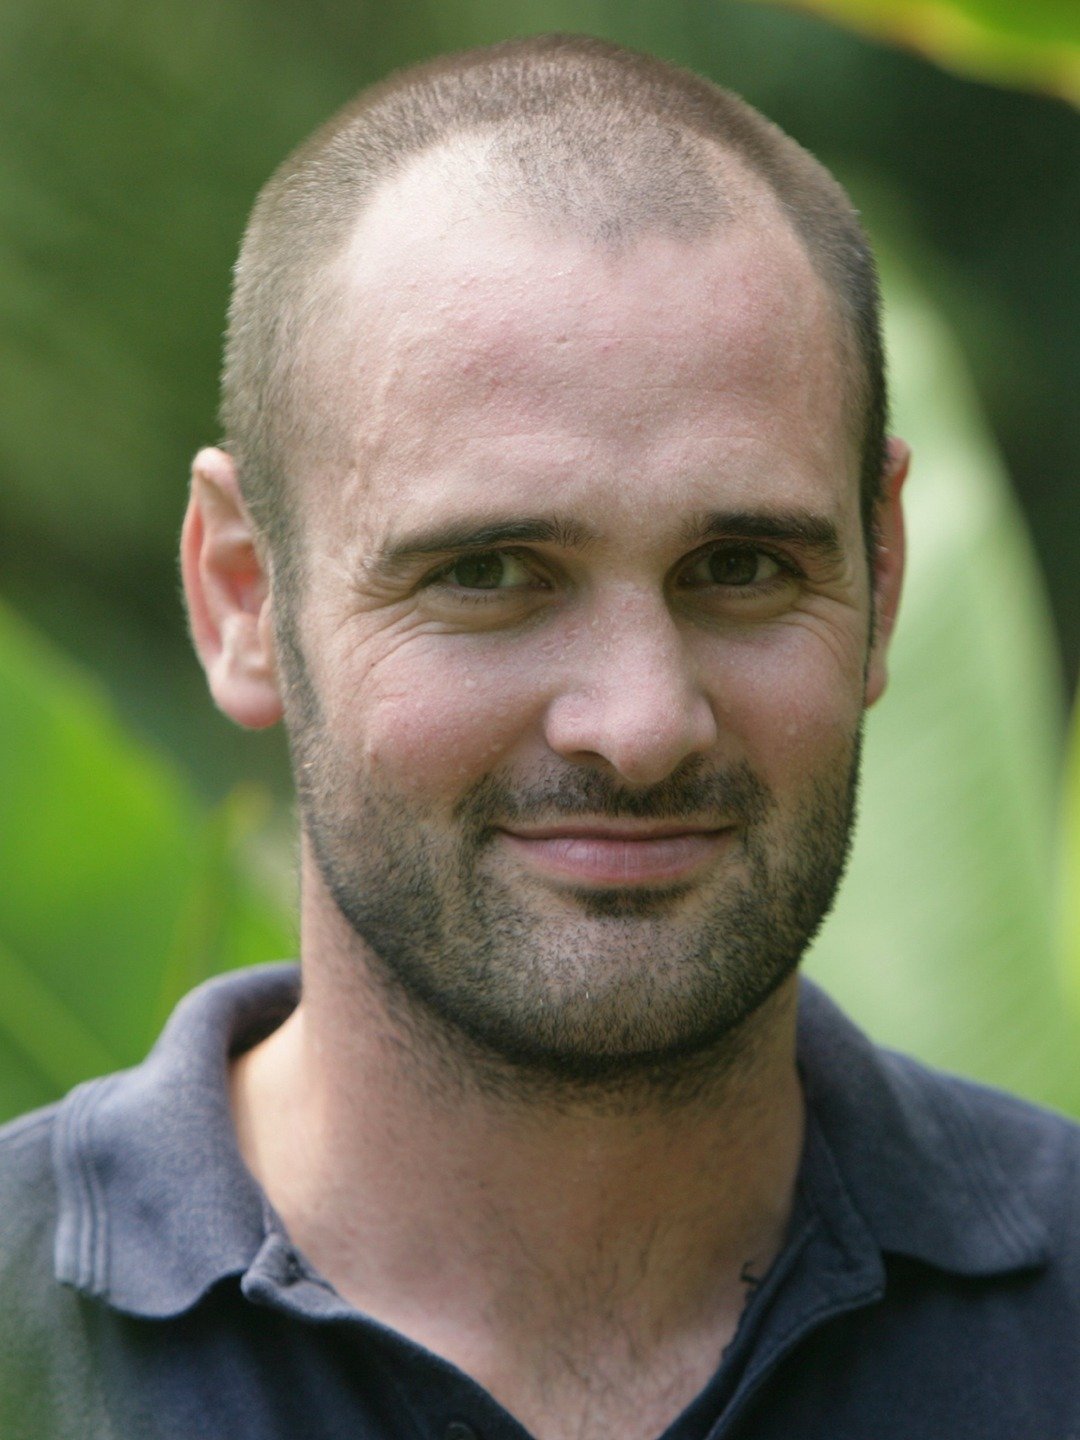 How tall is Ed Stafford?